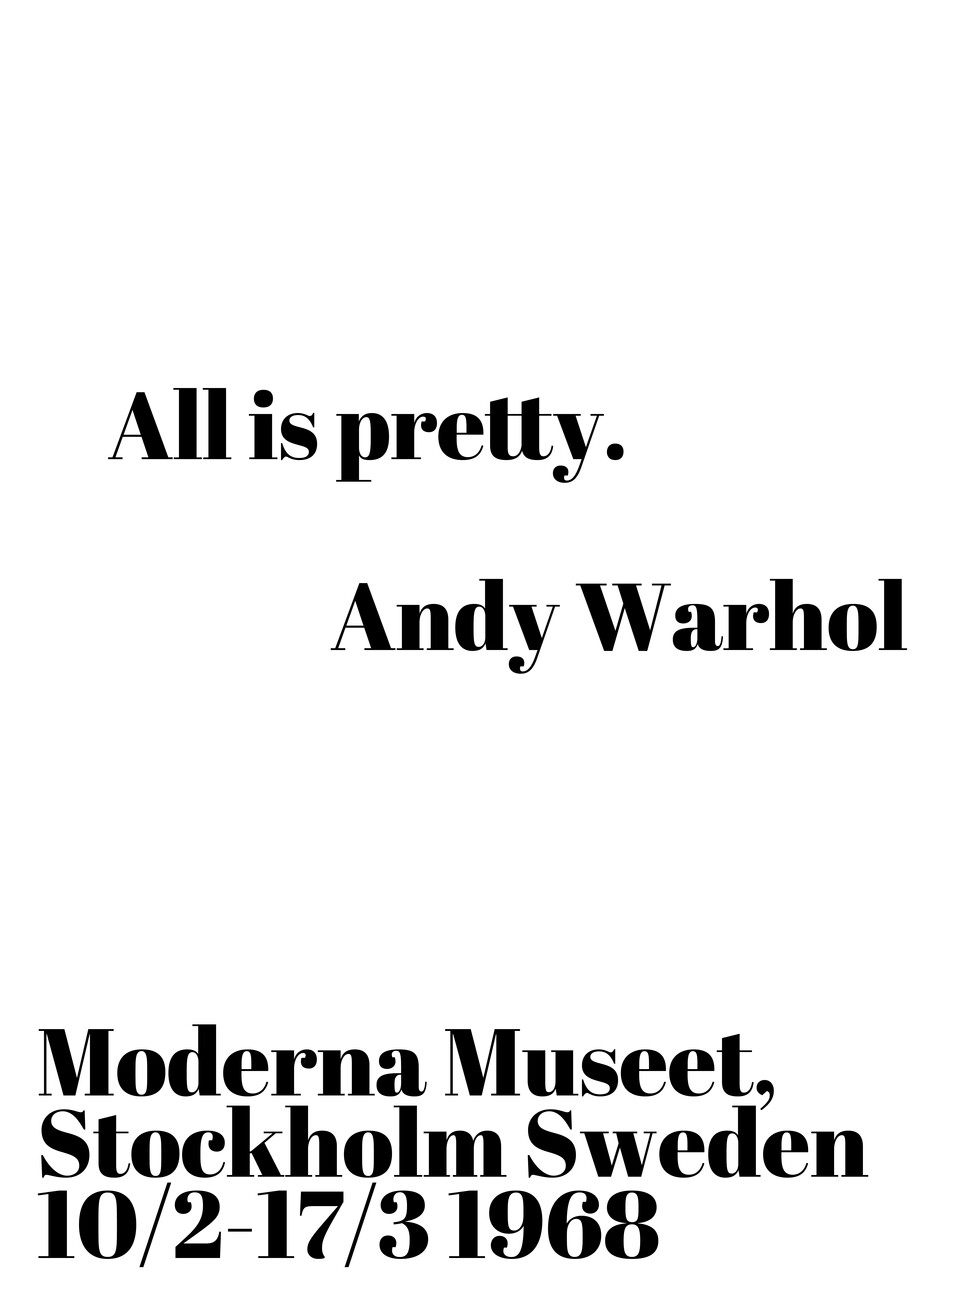 Wall Art Print | is pretty - Andy Warhol | Europosters